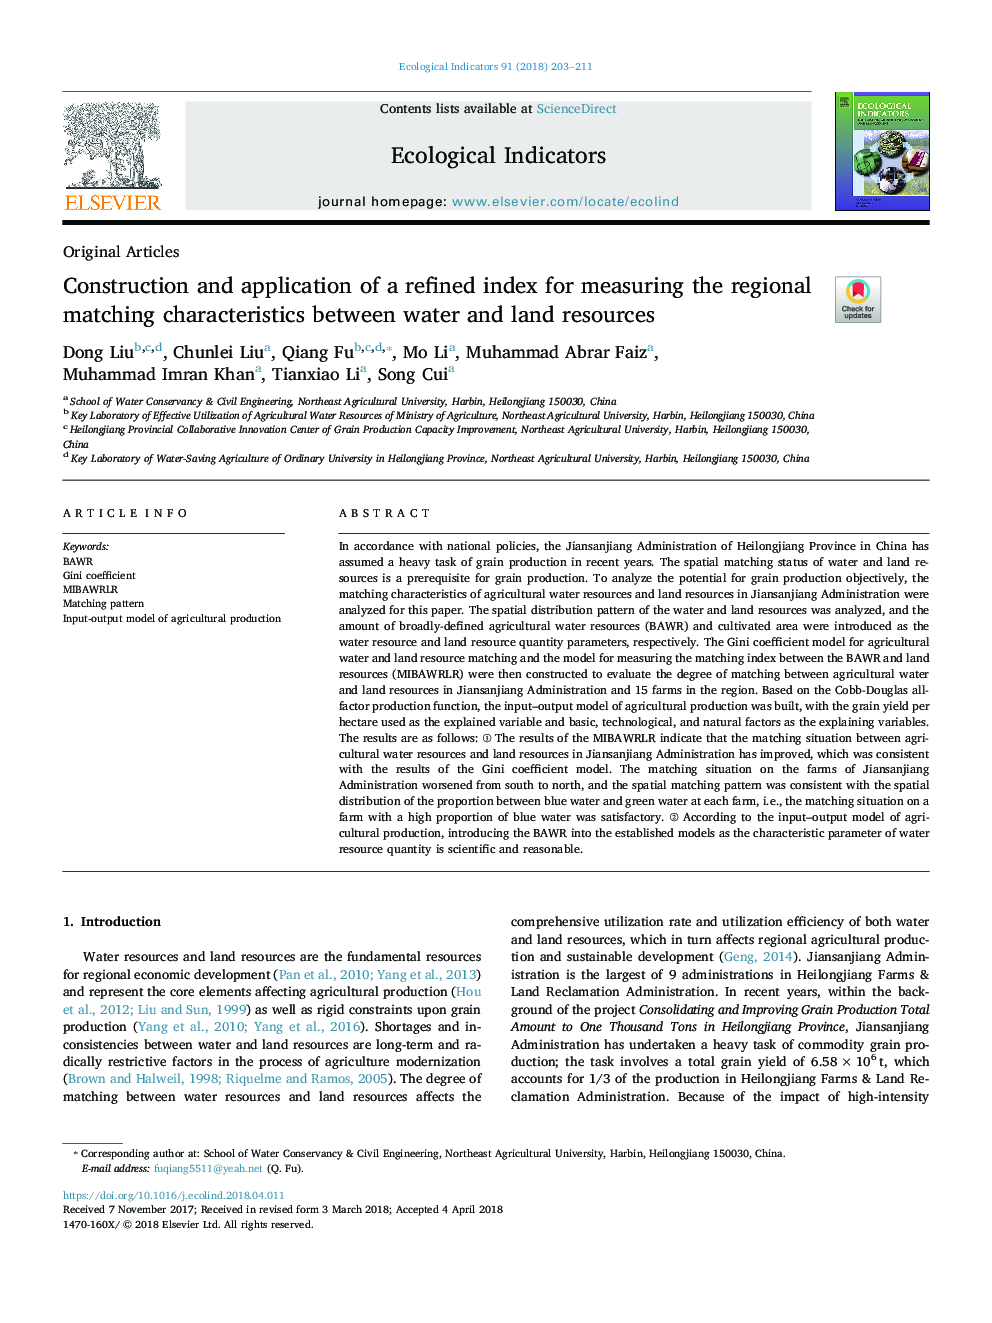 Construction and application of a refined index for measuring the regional matching characteristics between water and land resources